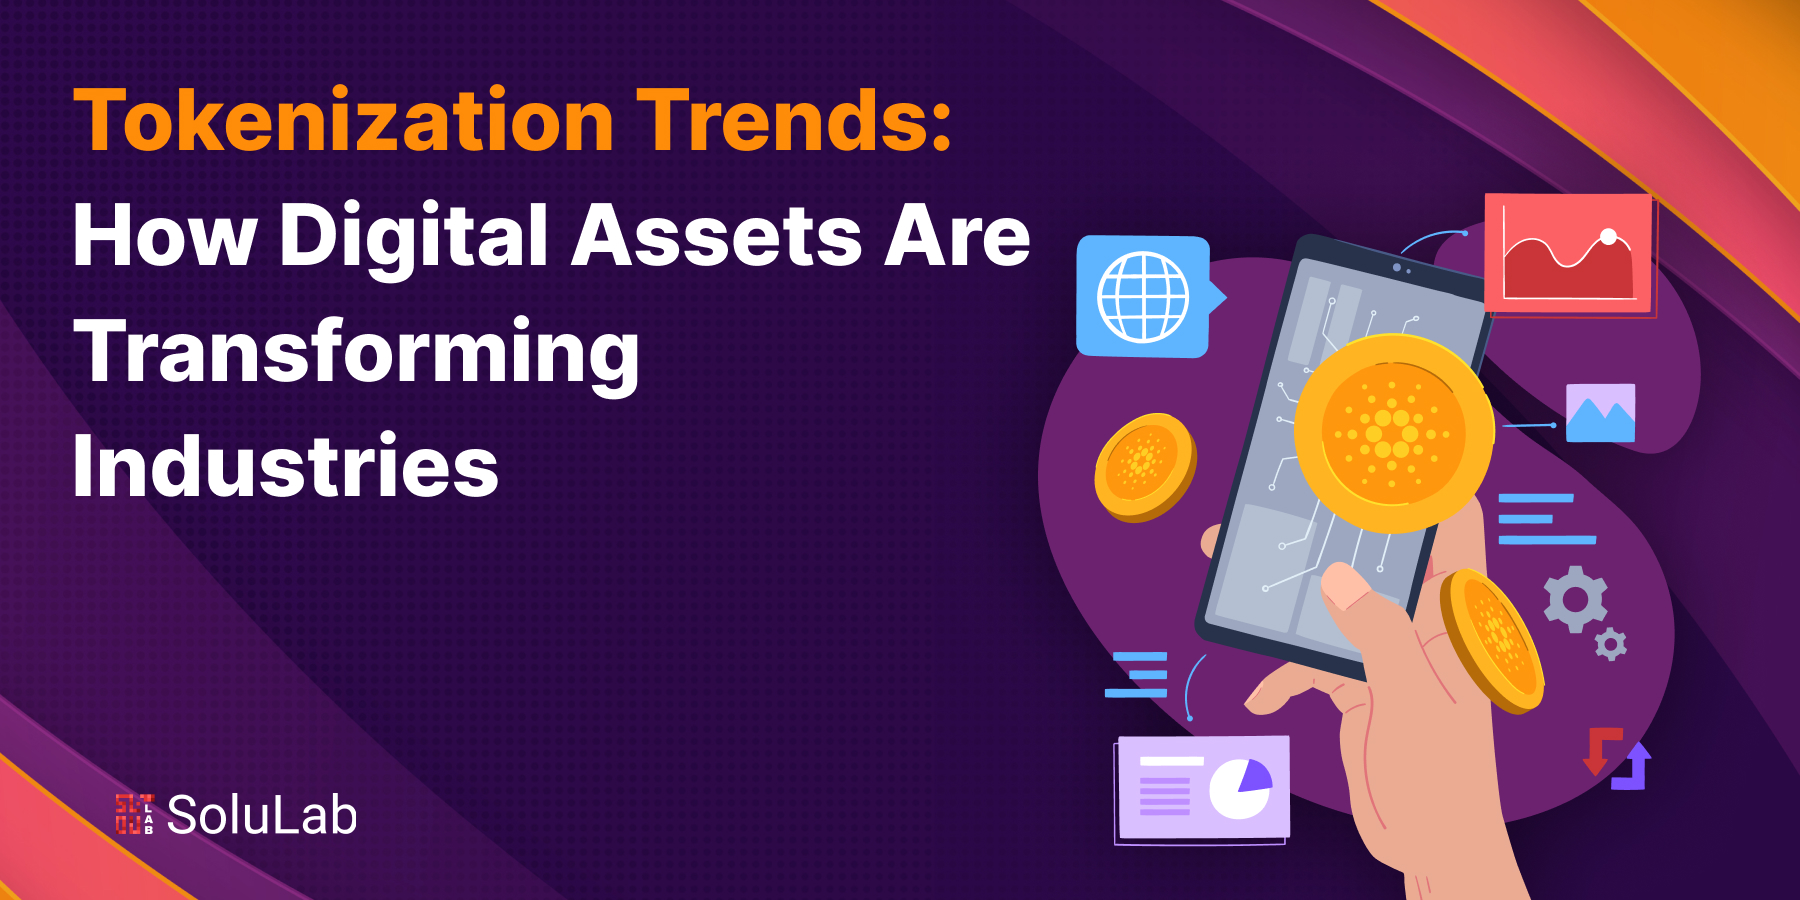 Tokenization Trends: How Digital Assets Are Transforming Industries